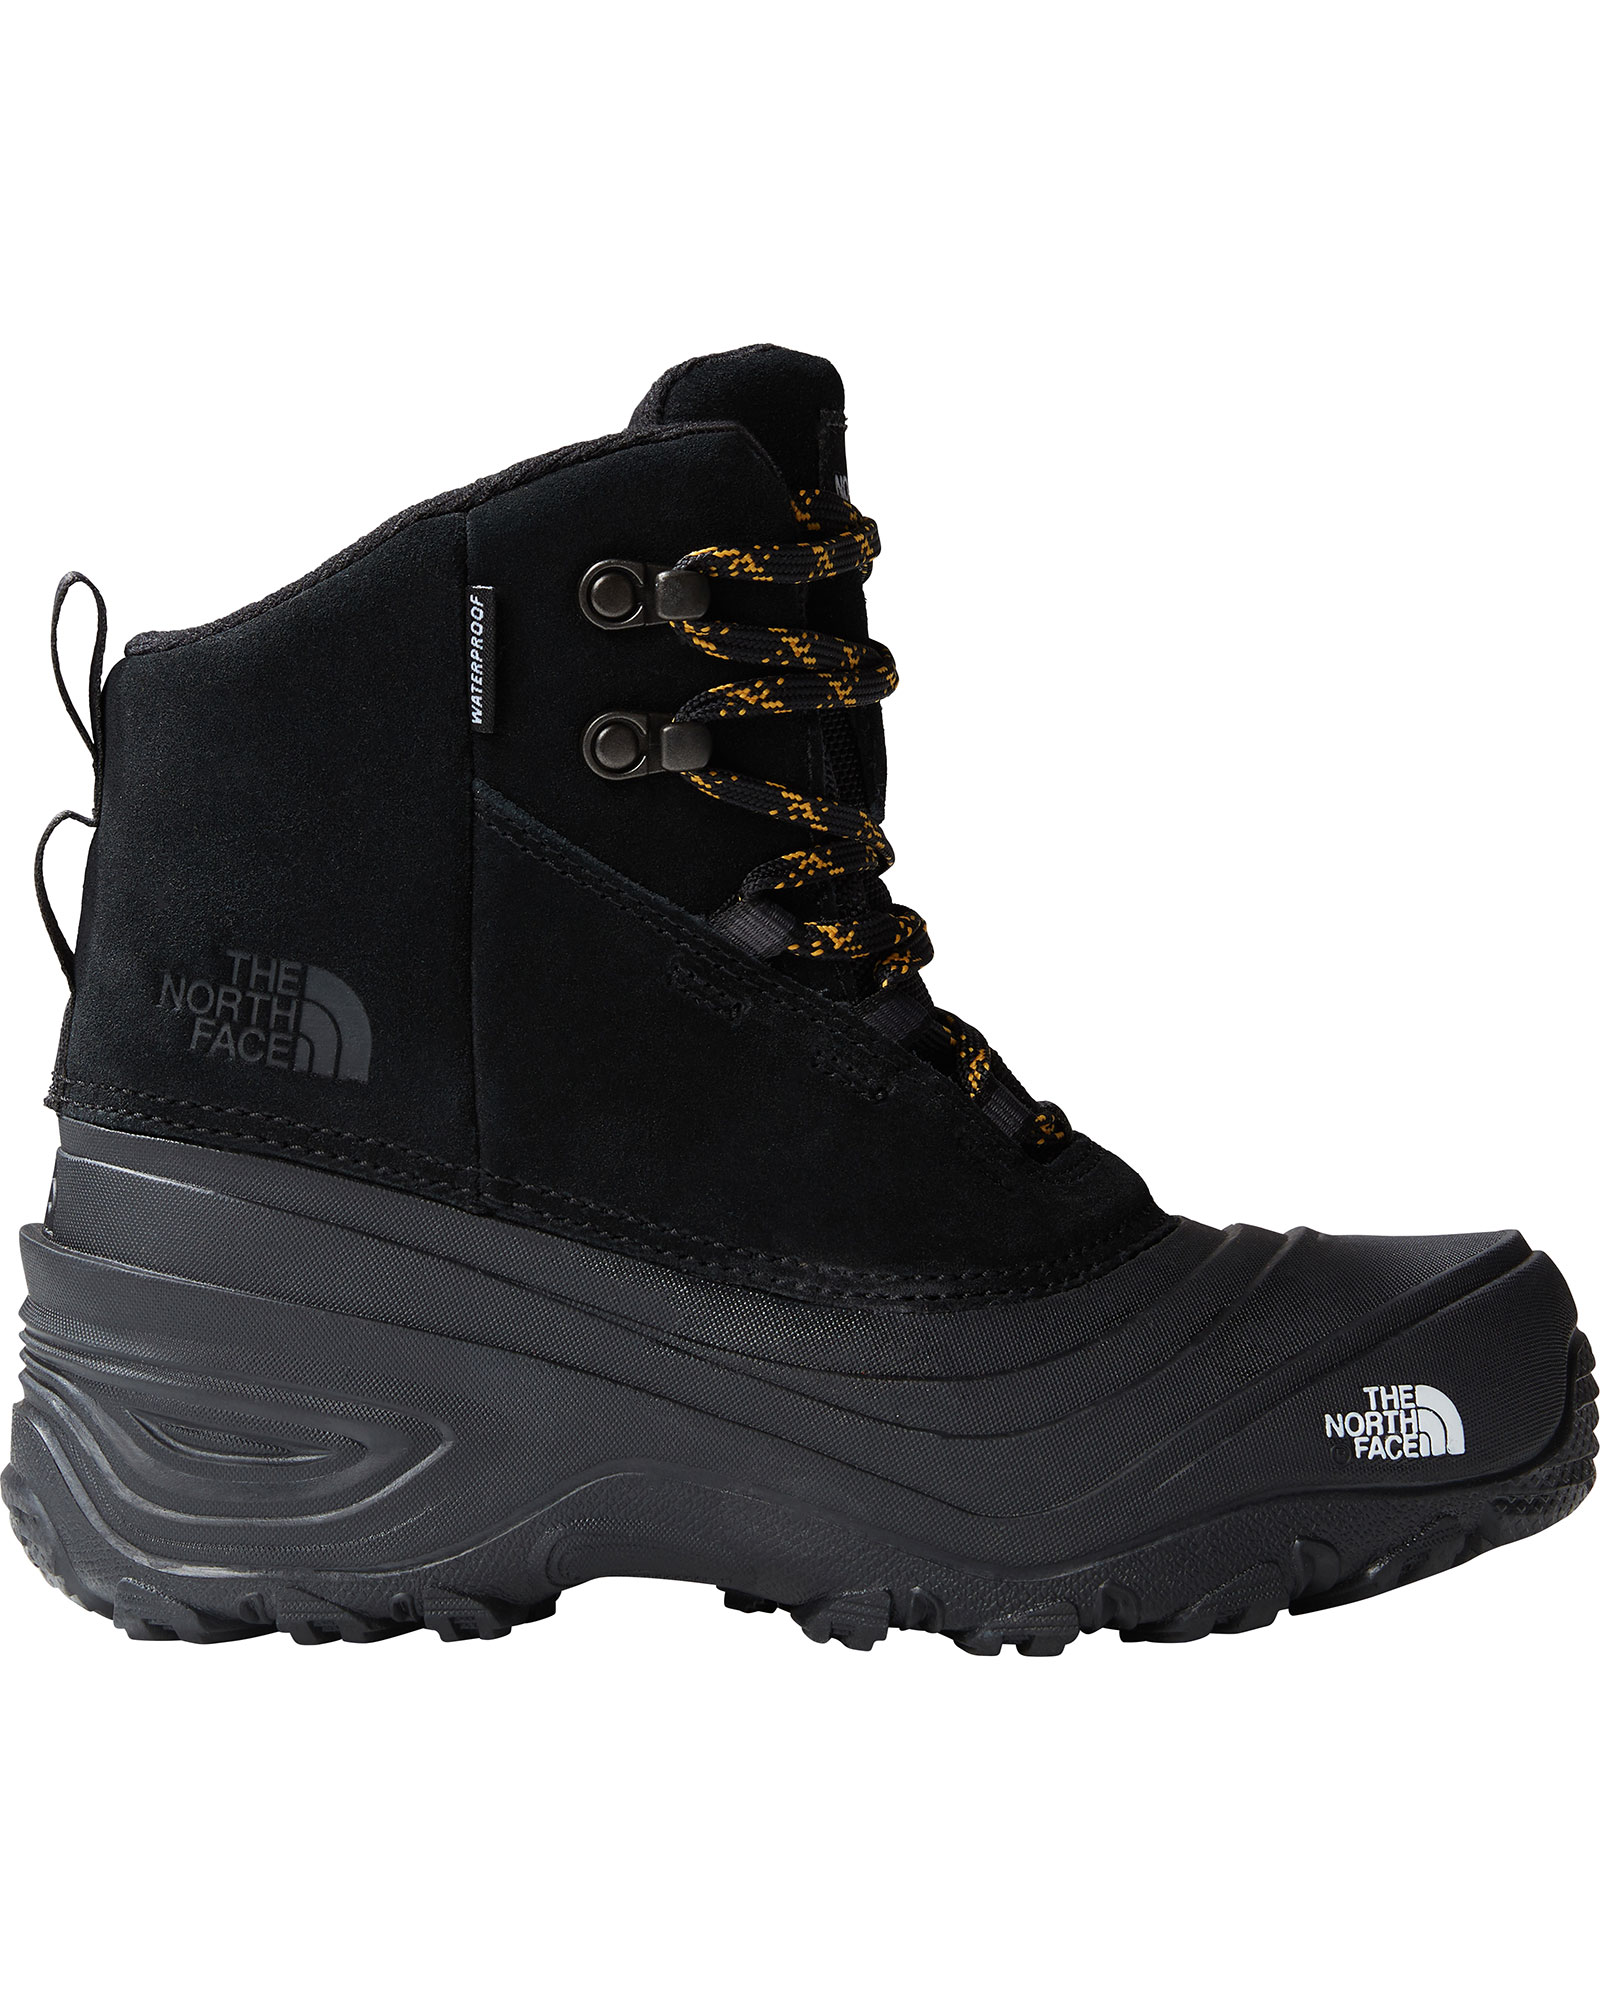 The North Face Youth Chilkat V Lace Waterproof Kid’s Boots - TNF Black/TNF Black UK 5